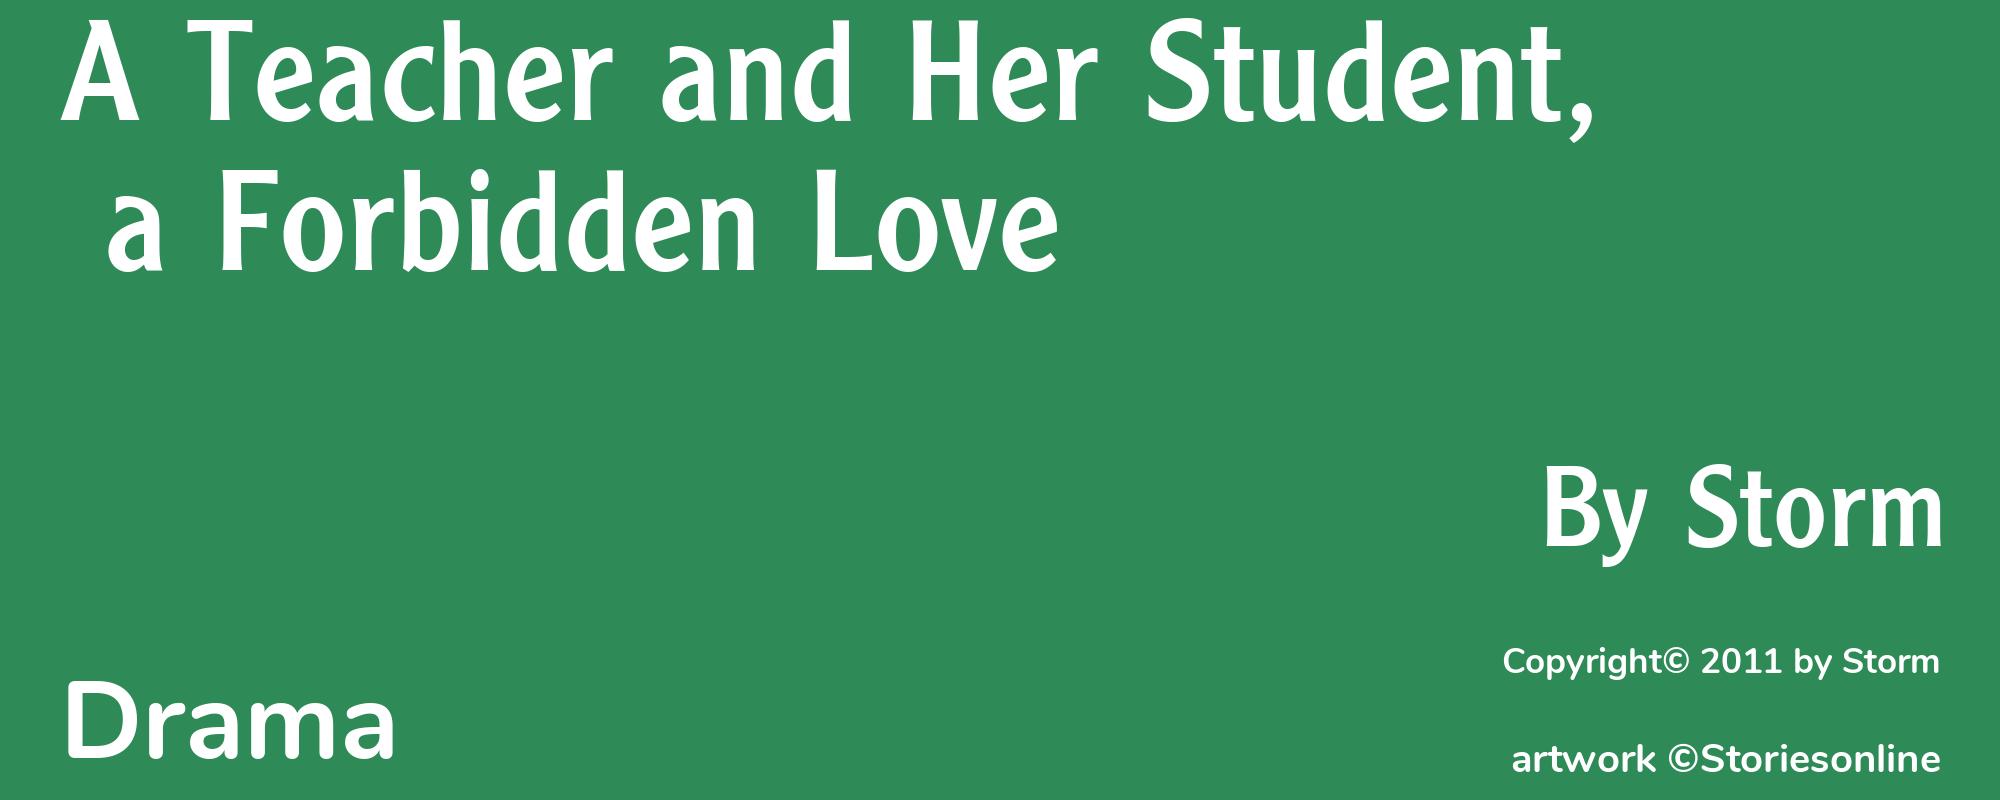 A Teacher and Her Student, a Forbidden Love - Cover